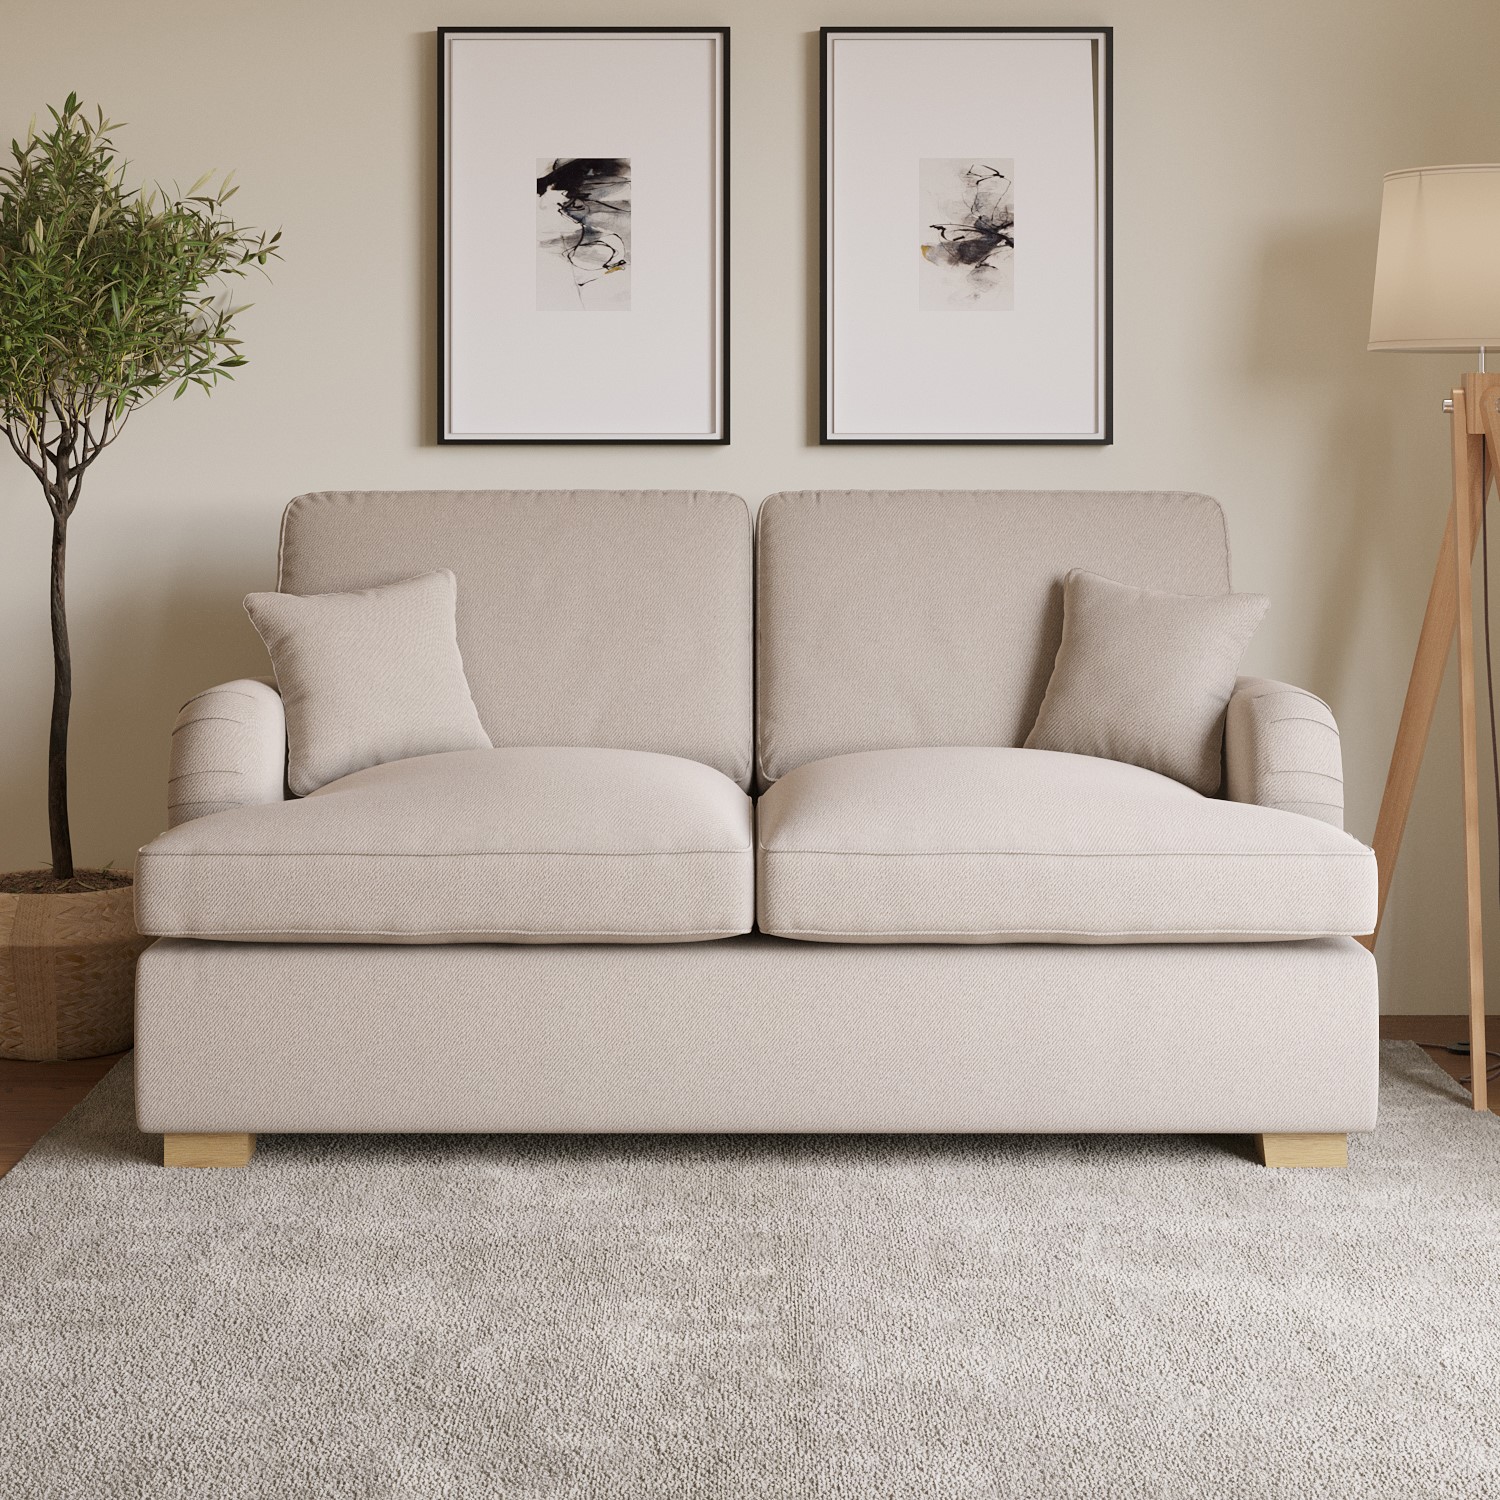 Photo of Beige fabric pull out sofa bed - seats 2 - payton